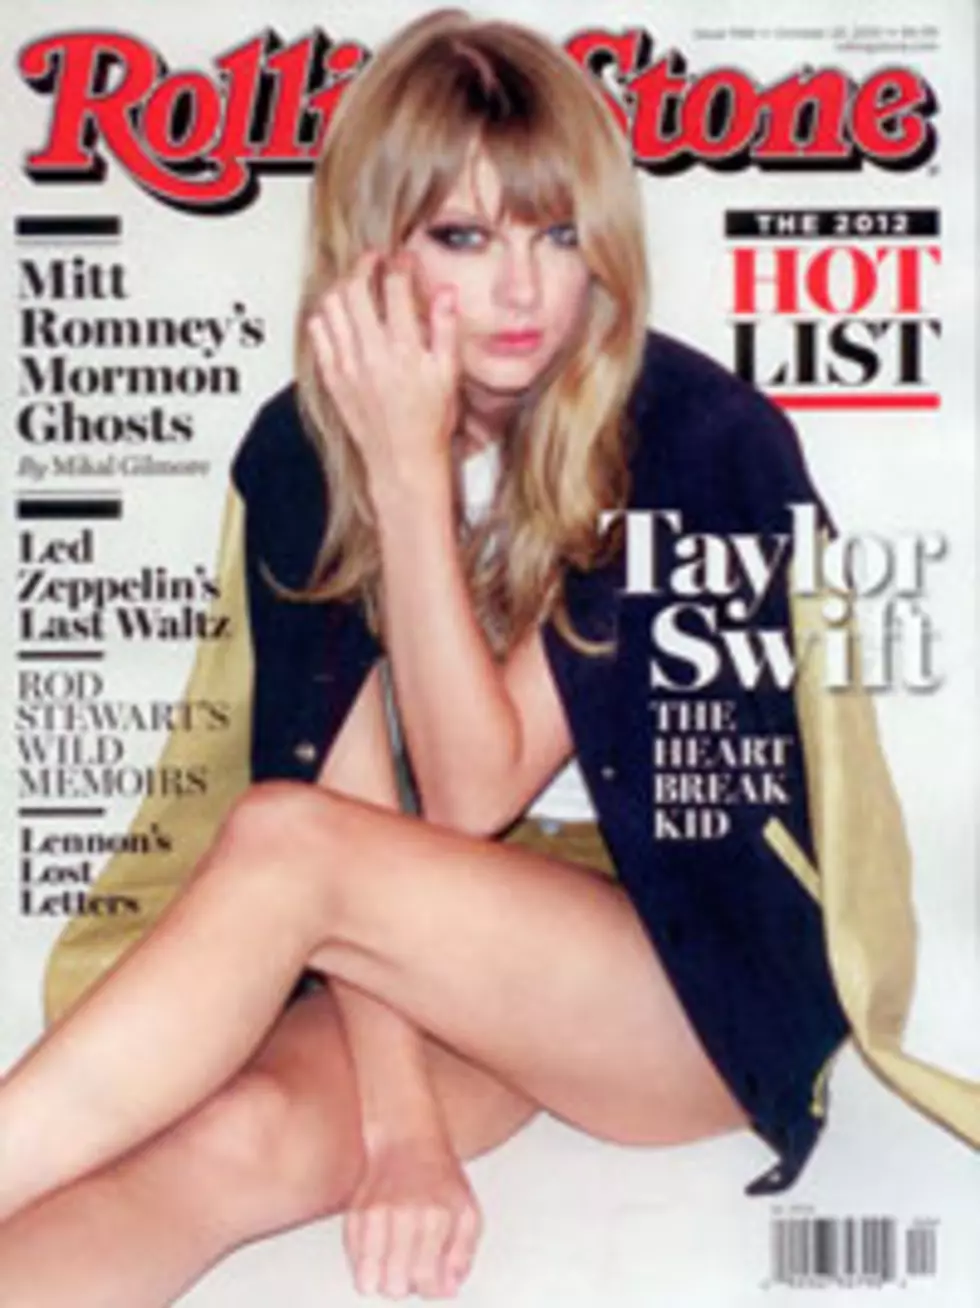 Taylor Swift Addresses ‘Serious Accusations’ in Rolling Stone